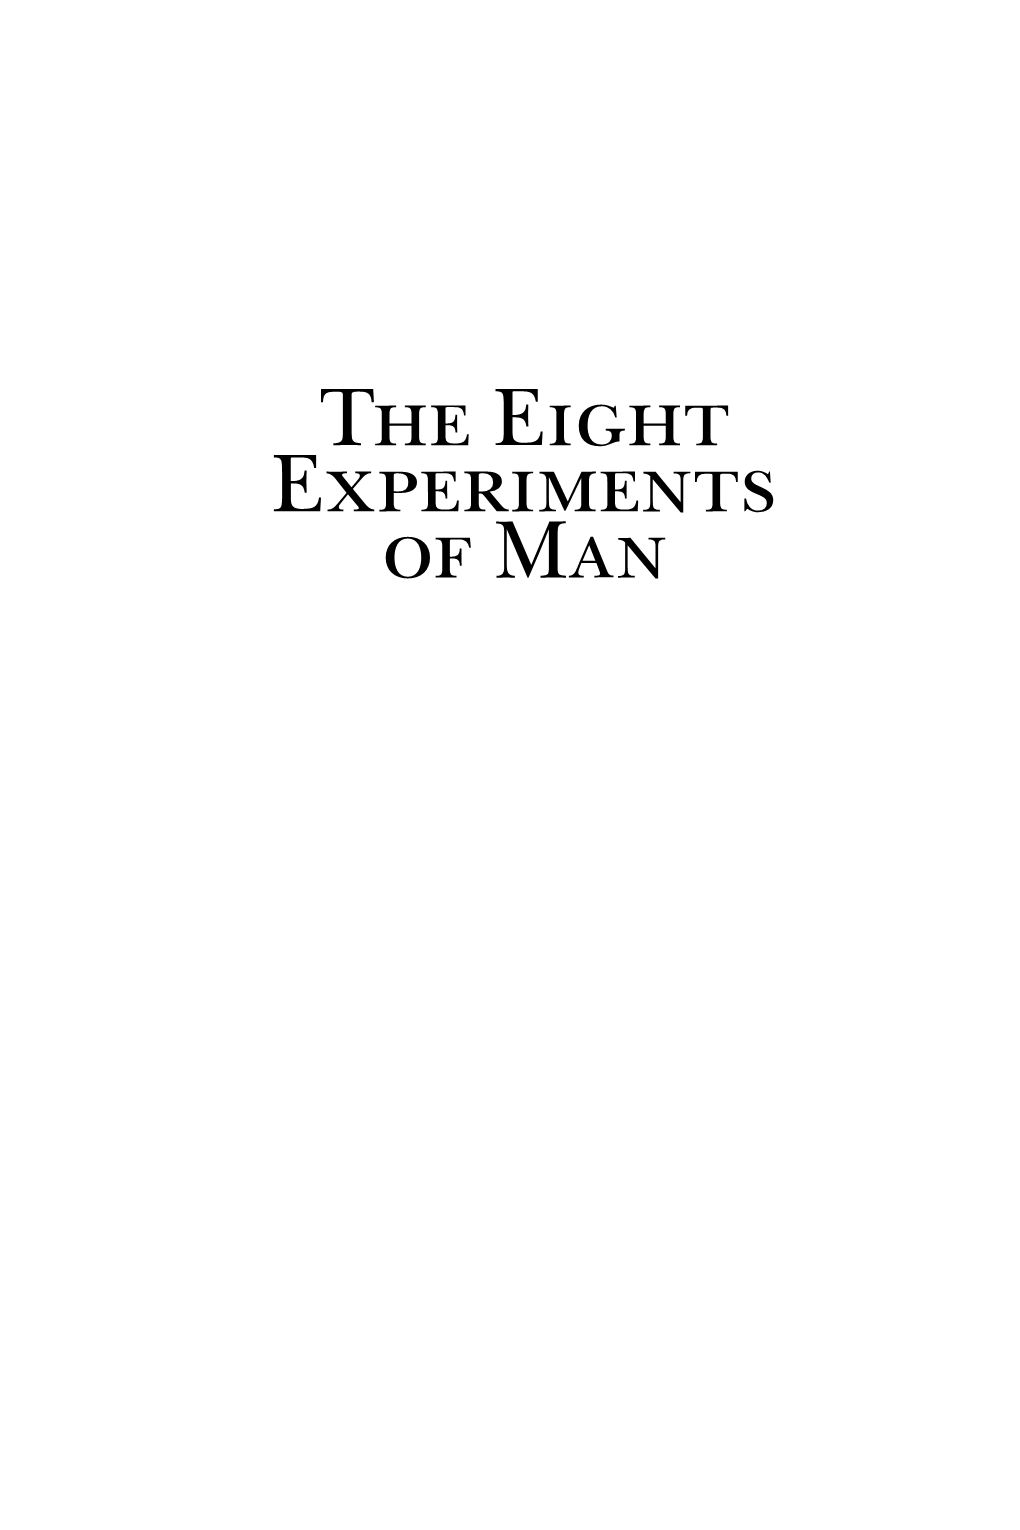 The Eight Experiments of Man